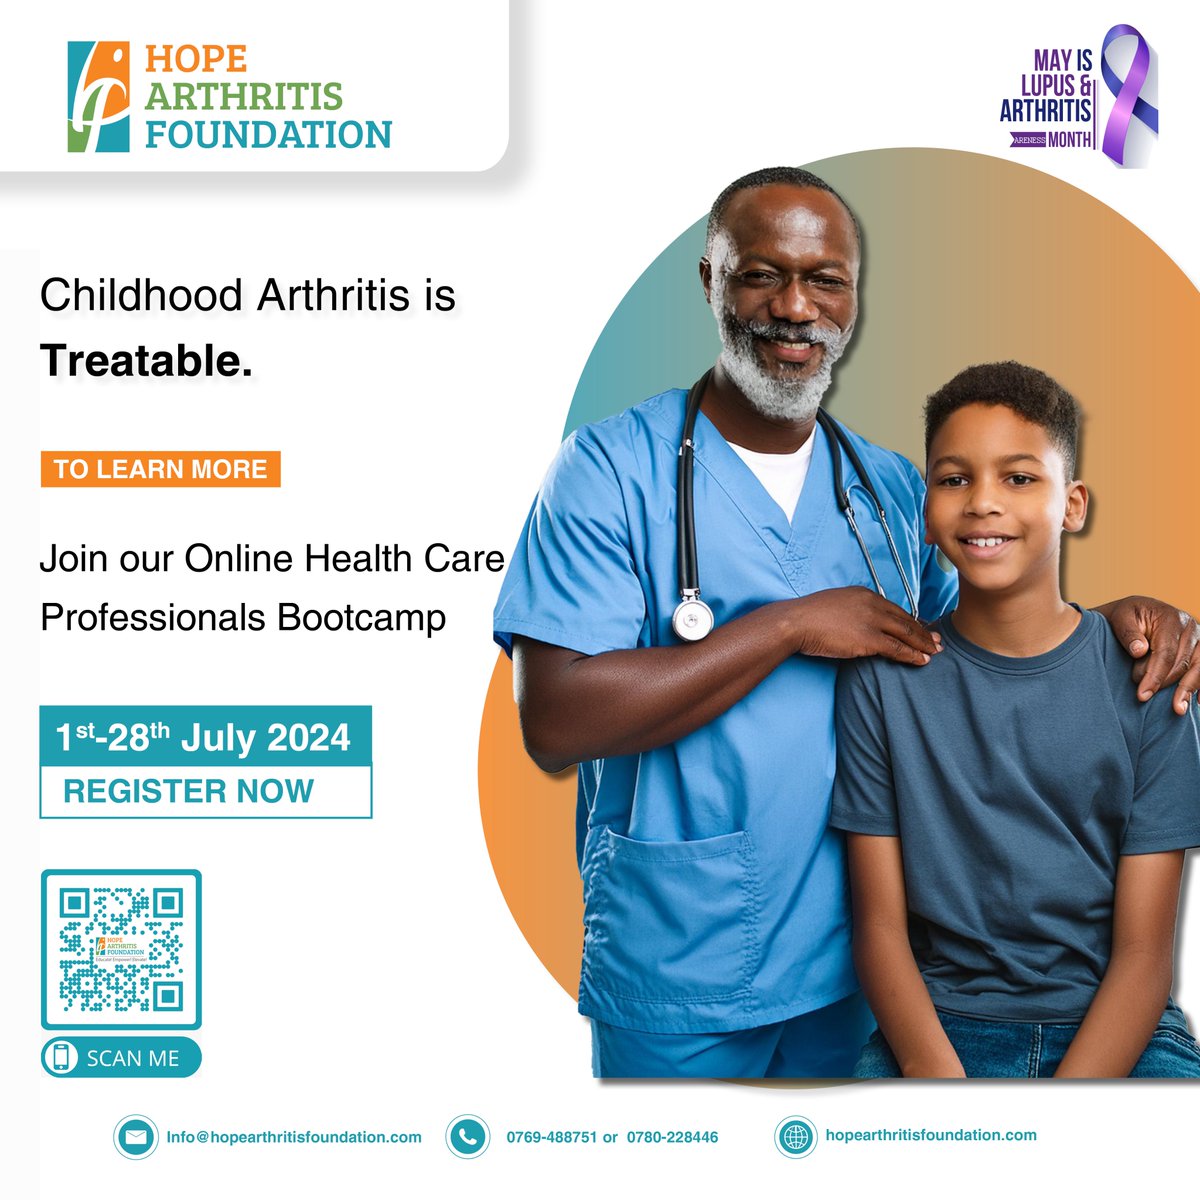 Help children with arthritis thrive! Join our boot camp for healthcare professionals to enhance your skills. 
Learn more: bit.ly/3wNEd8d
Register Now: bit.ly/HAFbootcamp
#ArthritisAwareness #LupusAwareness #BeatPediatricArthritis #hopearthritisfoundation